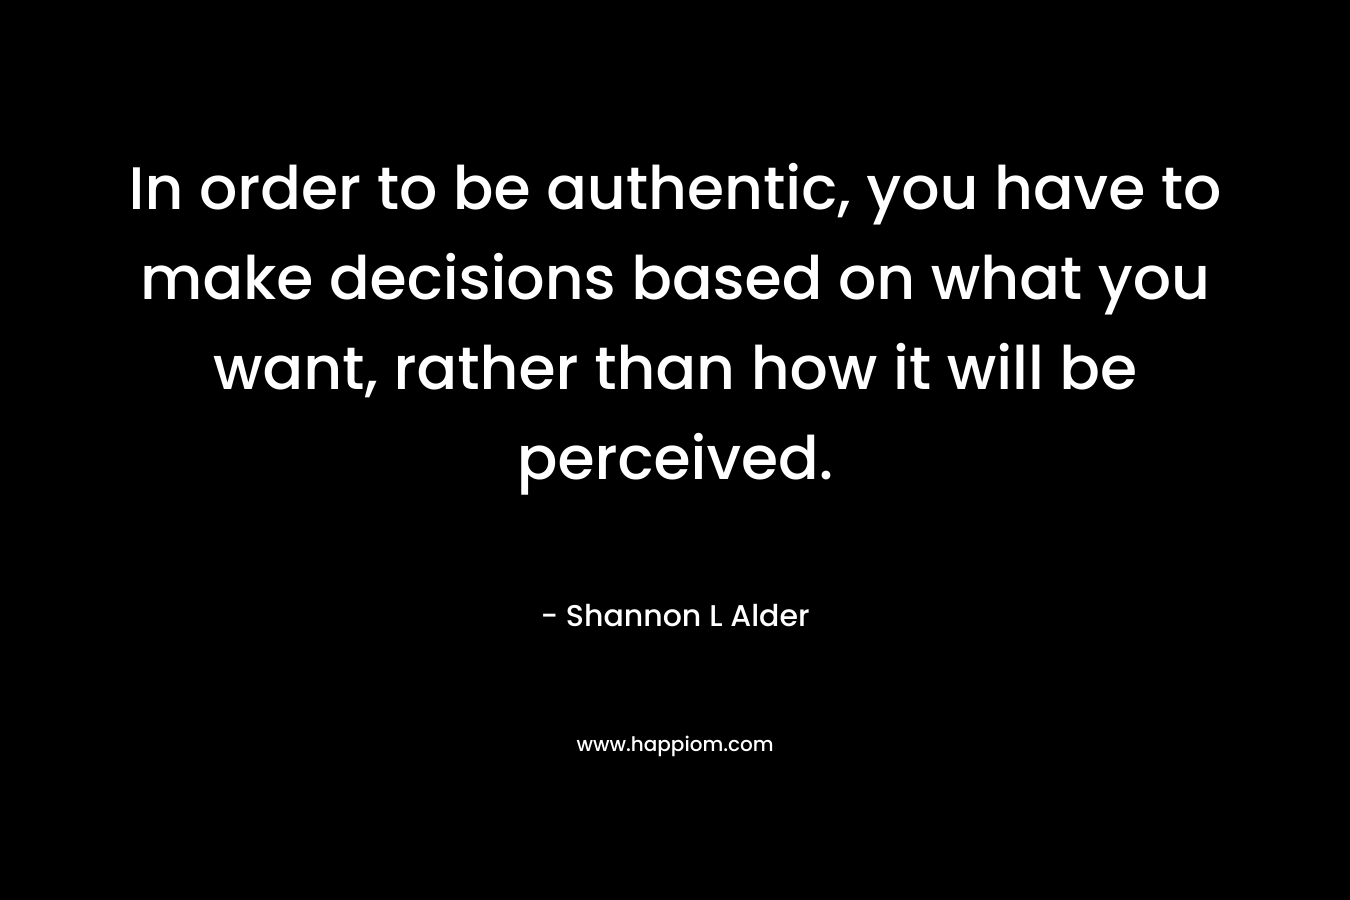 In order to be authentic, you have to make decisions based on what you want, rather than how it will be perceived.